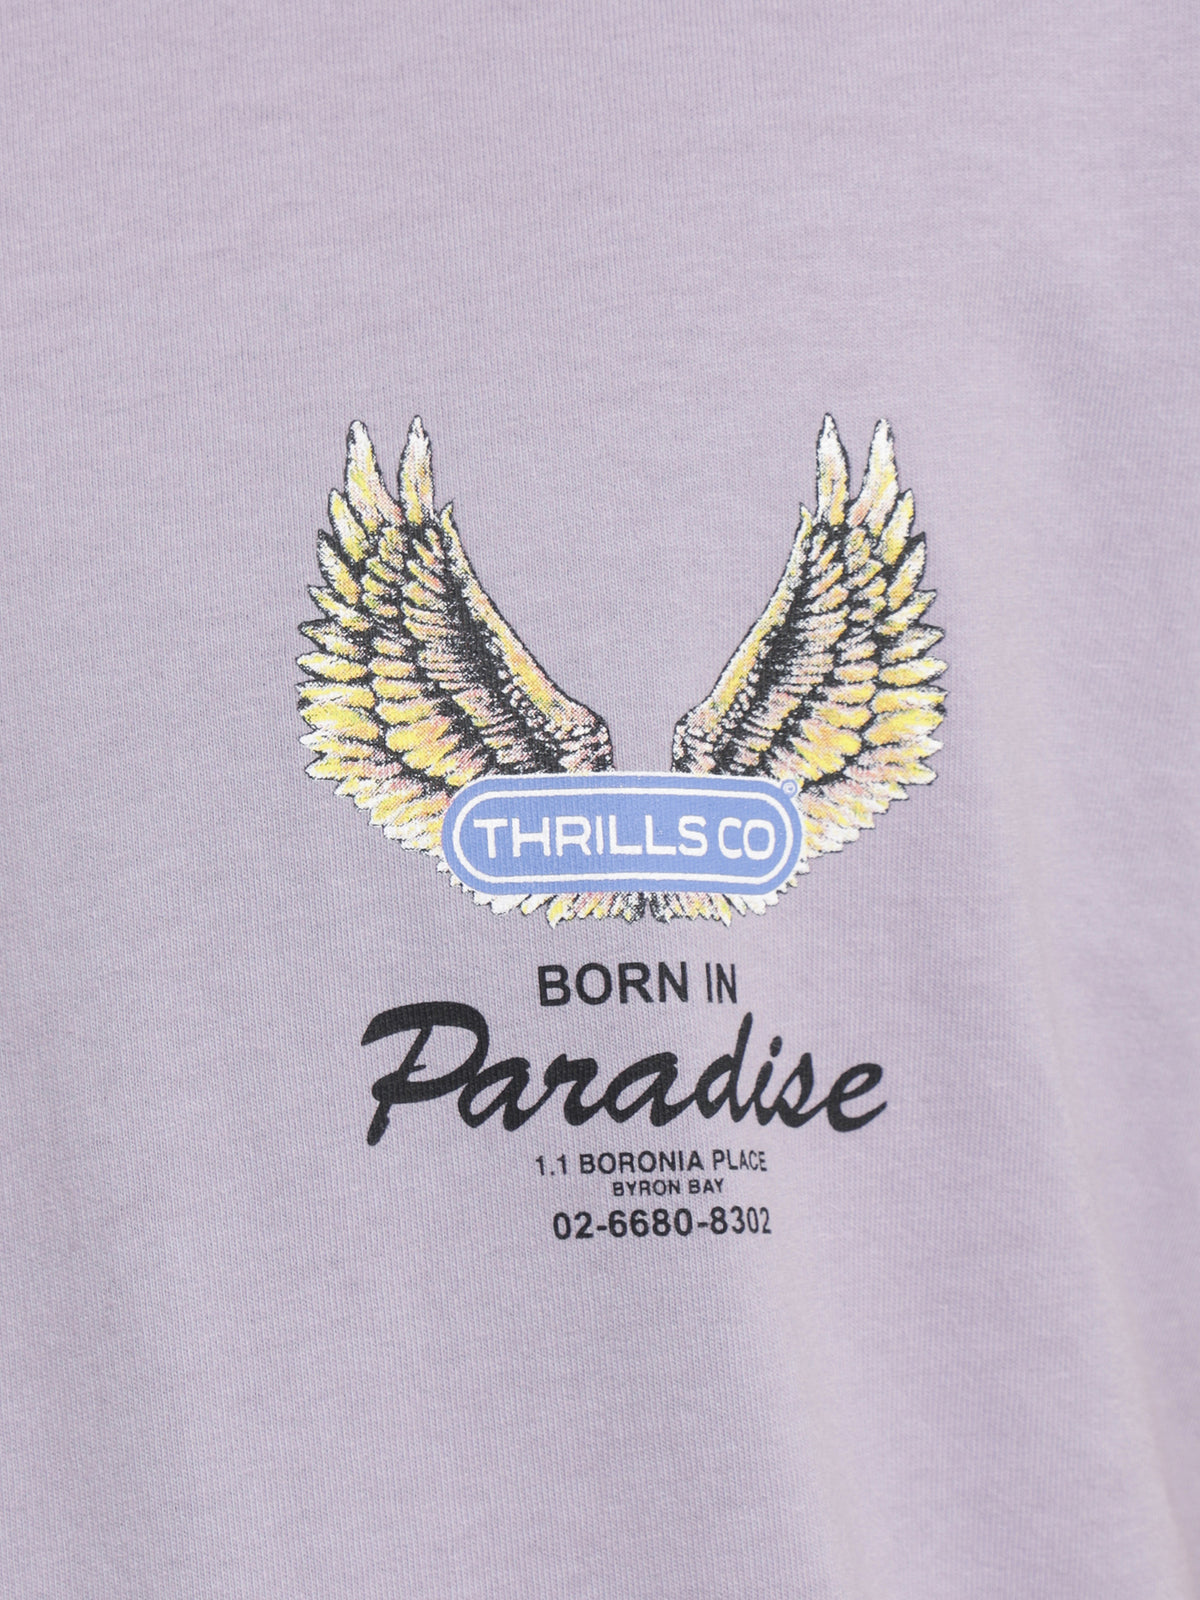 Wings of Paradise Merch Fit T-Shirt in Lilac Ash